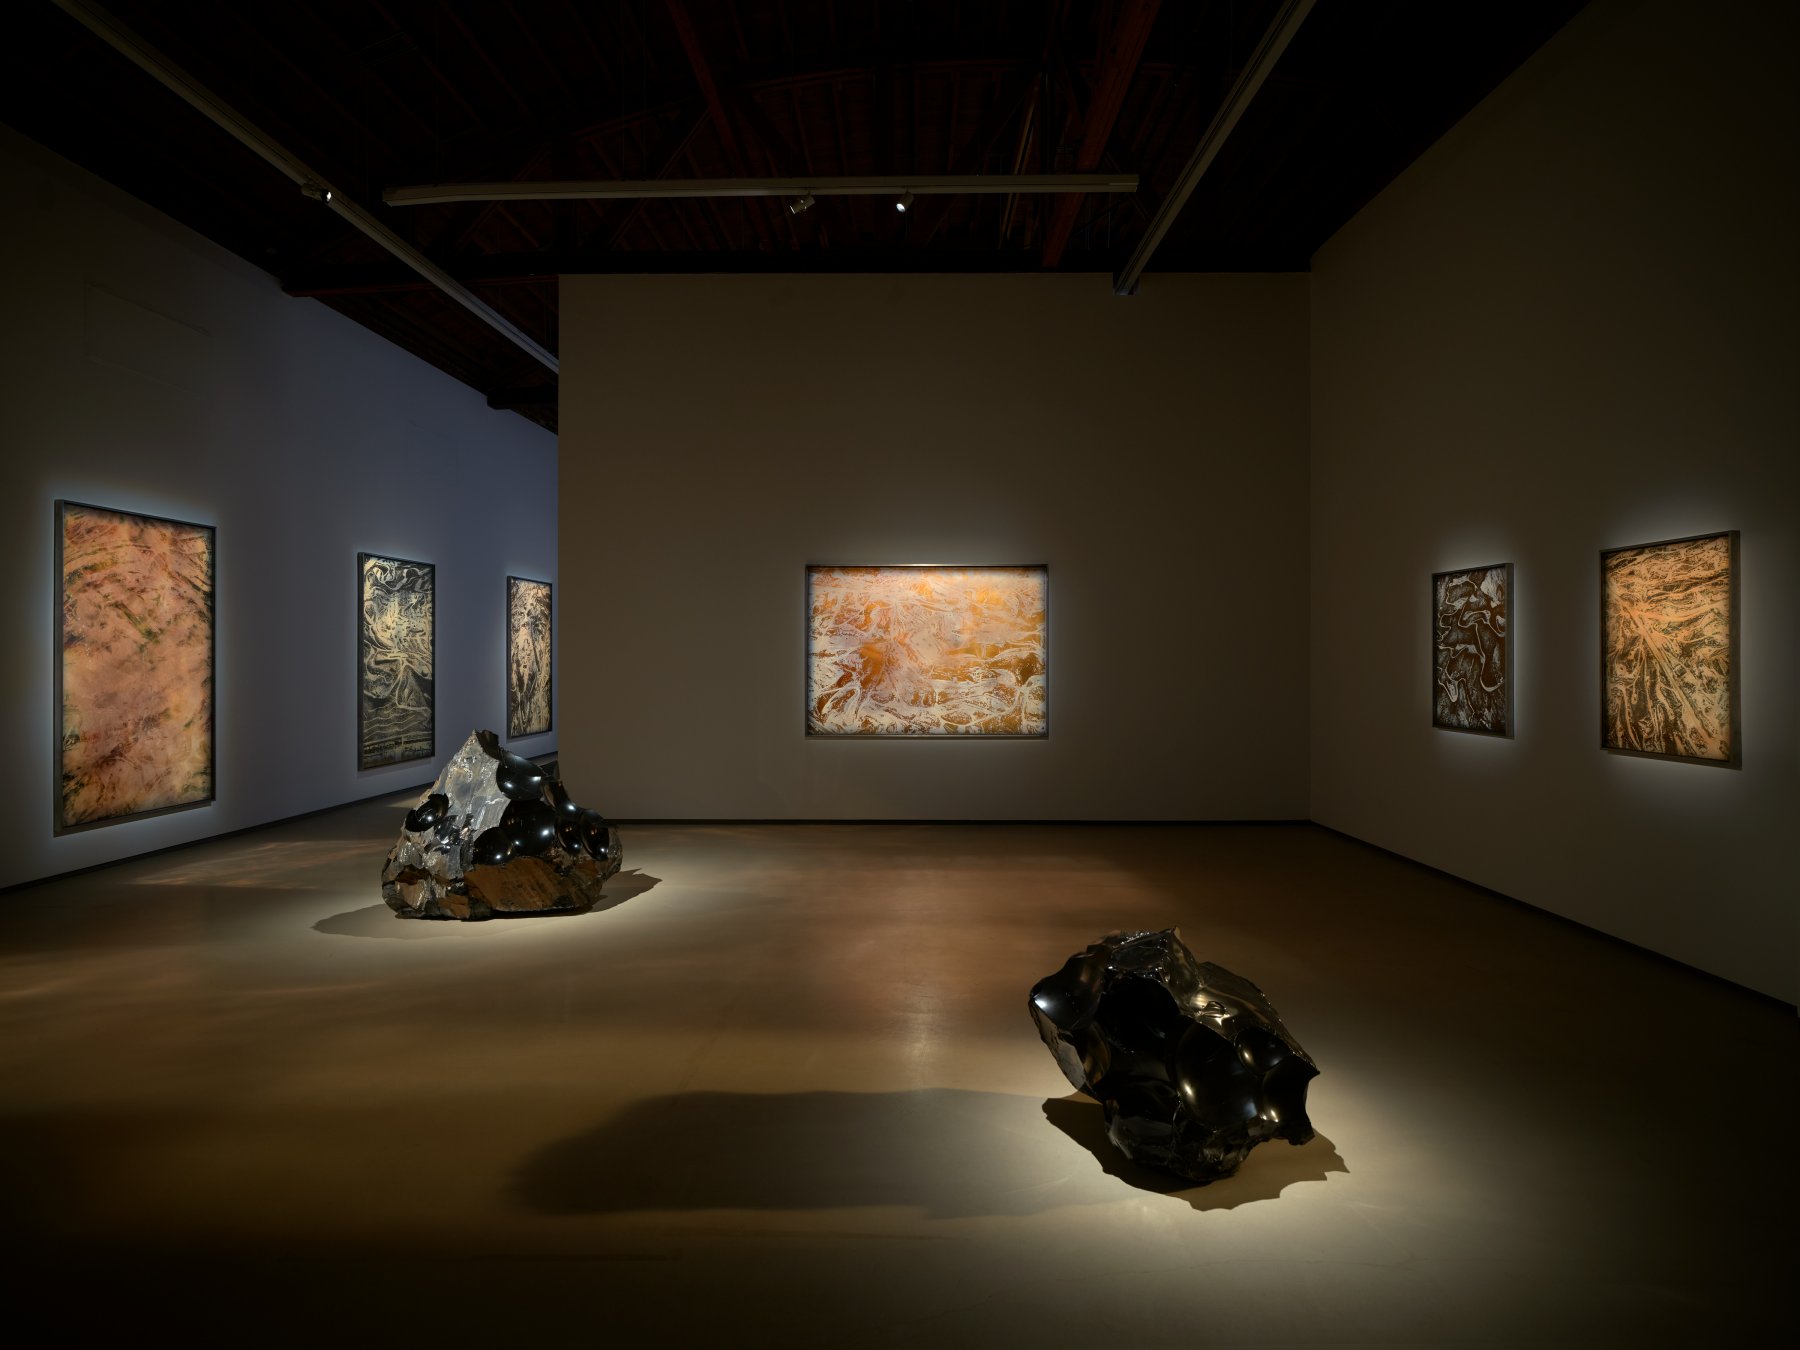 Installation image for Julian Charrière: Buried Sunshine, at Sean Kelly Gallery